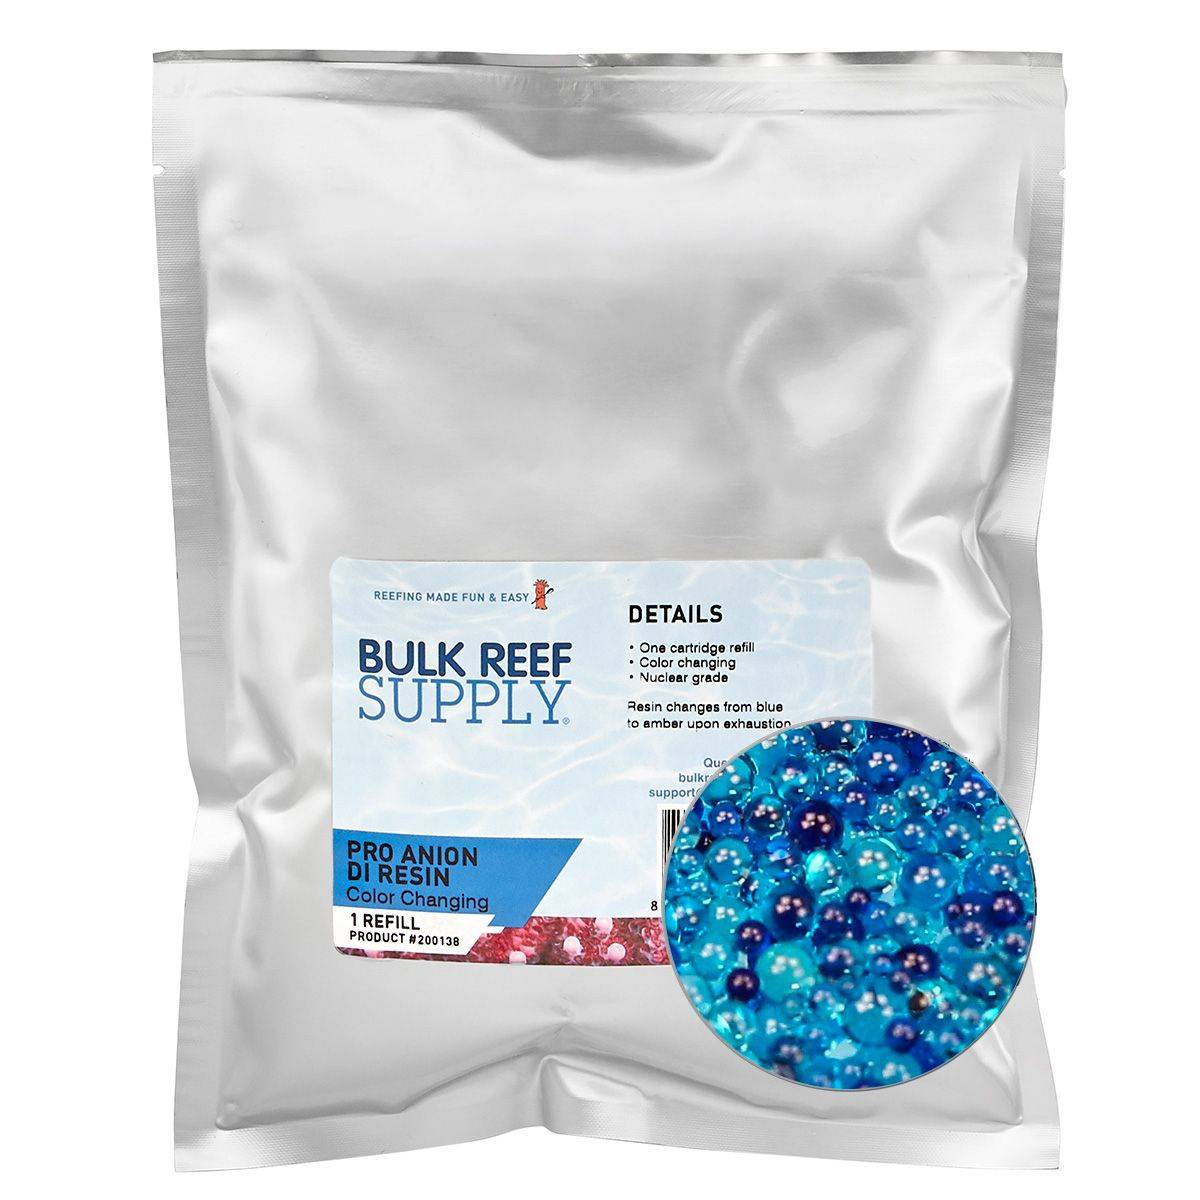 Bulk Reef Supply One Cartridge Refill (1.4 lbs.) PRO Series Blue Anion Deionization Resin (Color Changing) - Part 2